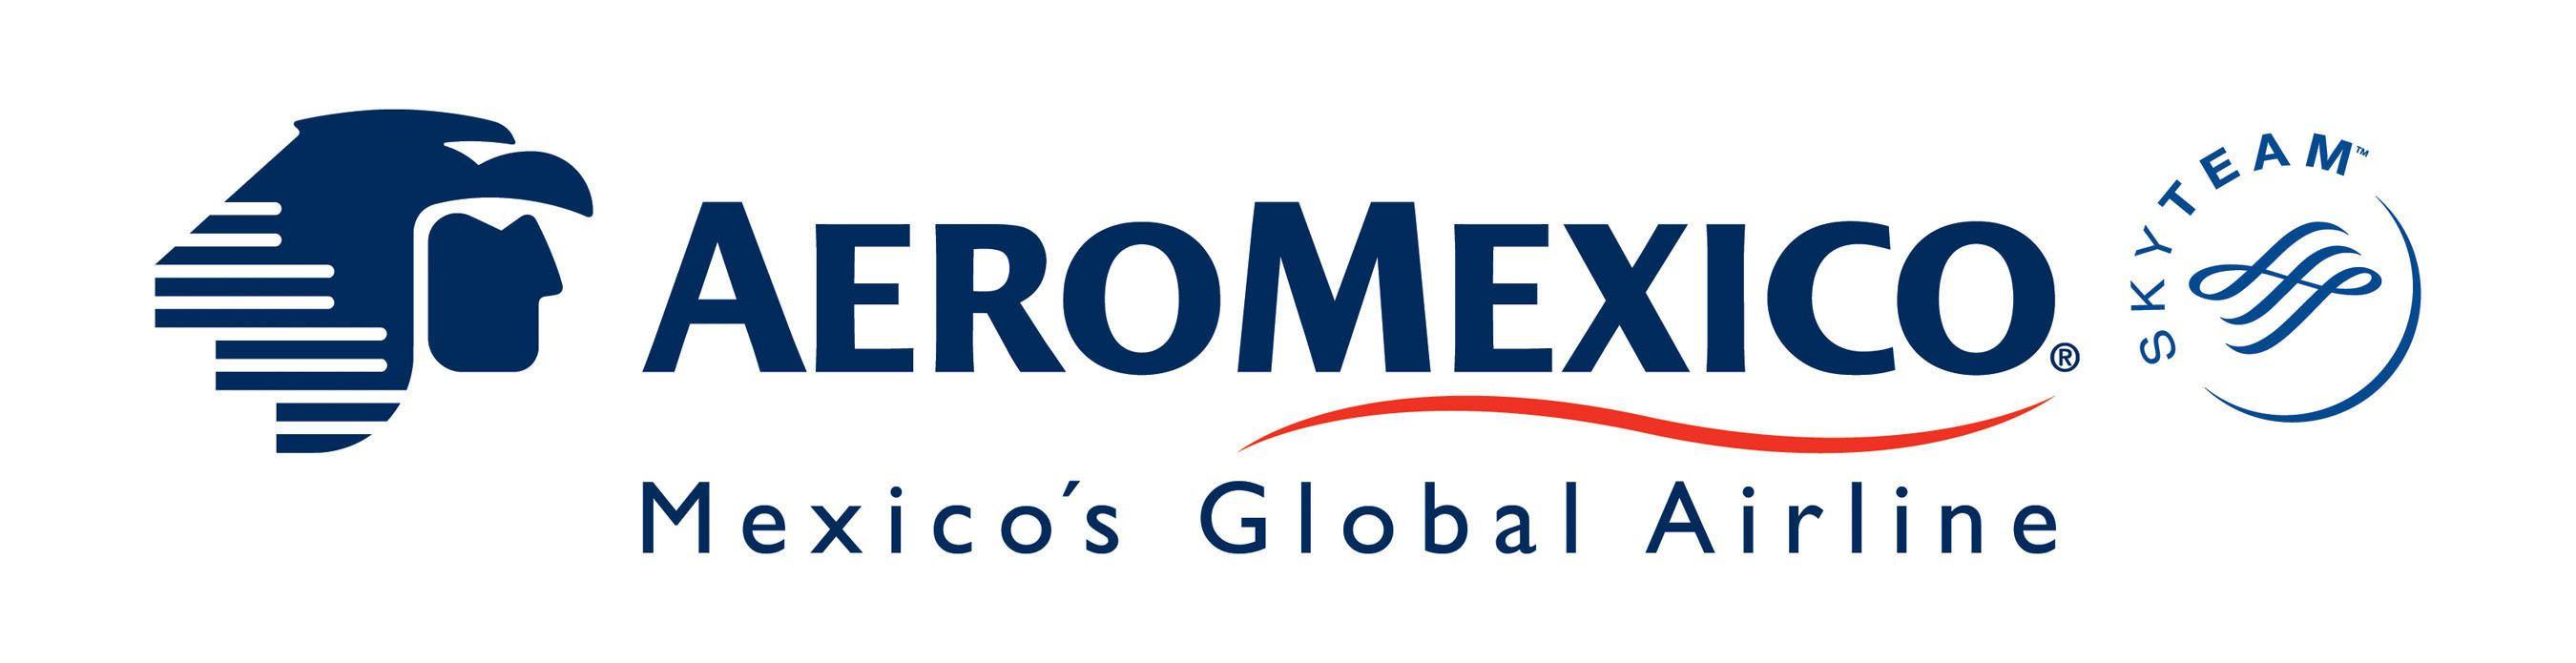 Leading Airline Logo - Aeromexico Takes the Title of Mexico & Central America's Leading